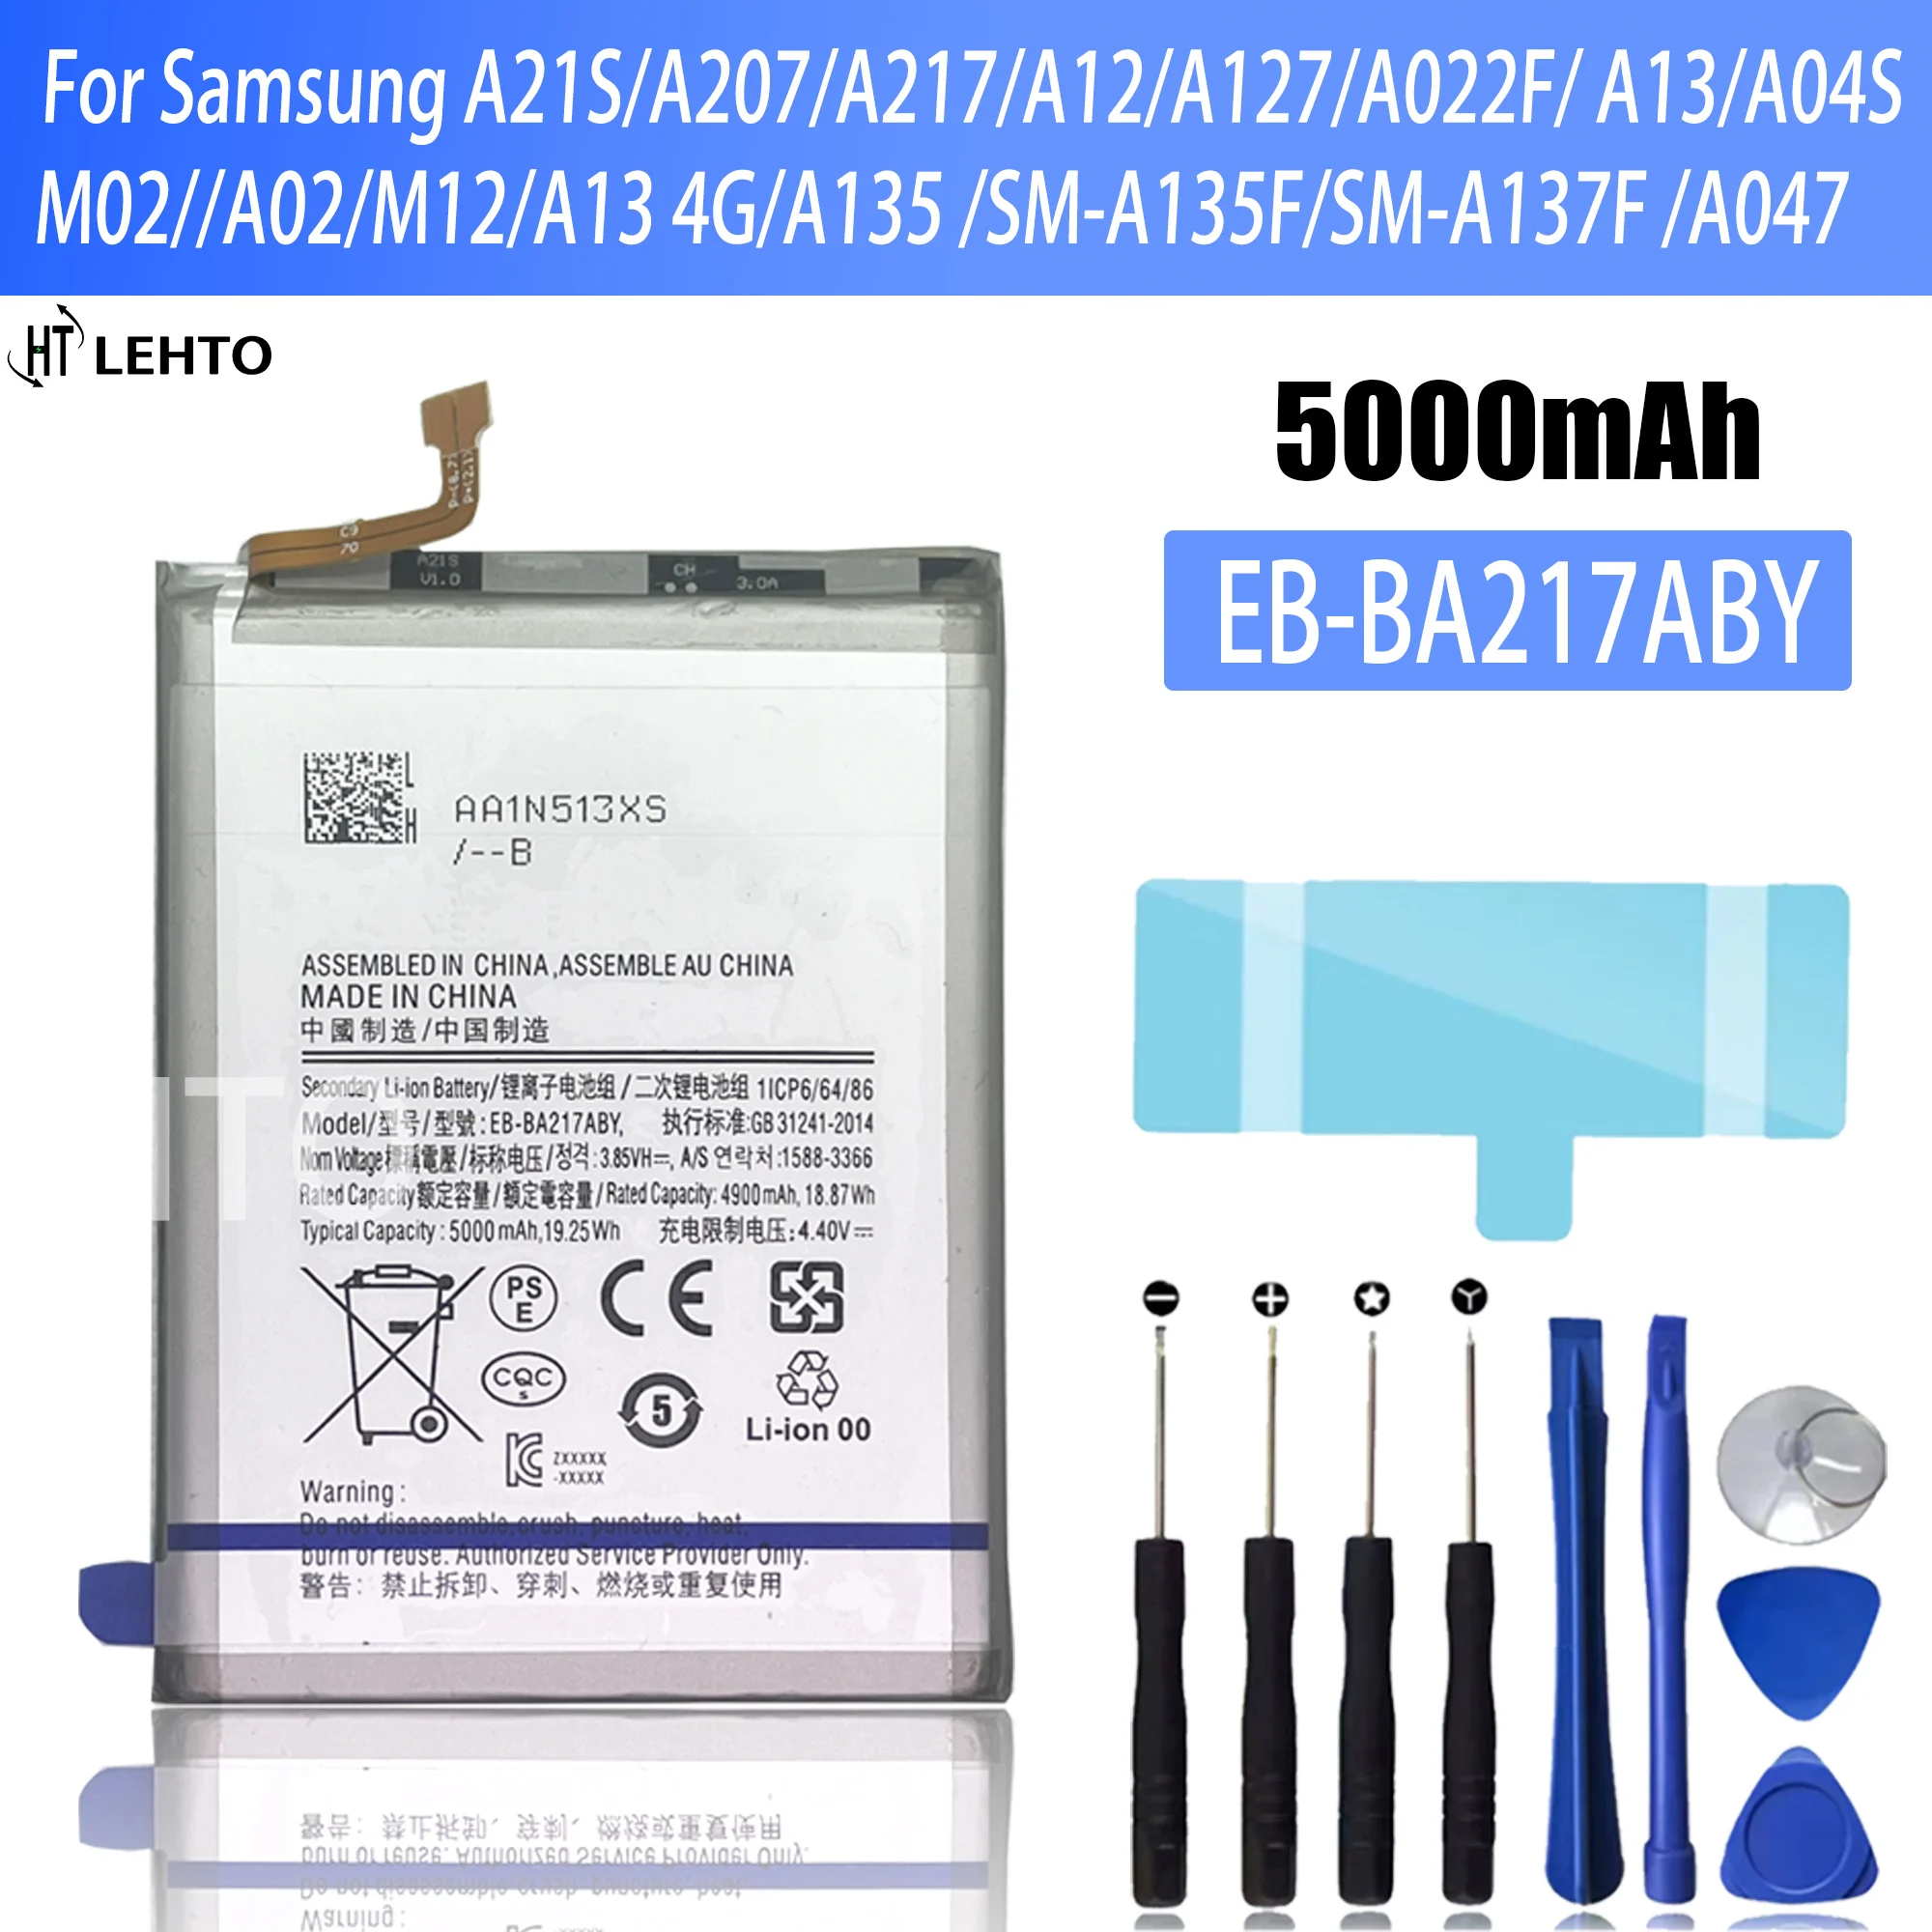 

EB-BA217ABY 5000mAh high capacity Replacement Battery For Samsung Galaxy A21s SM-A217F/DS SM-A217M/DS SM-A217F/DSN + tools phone